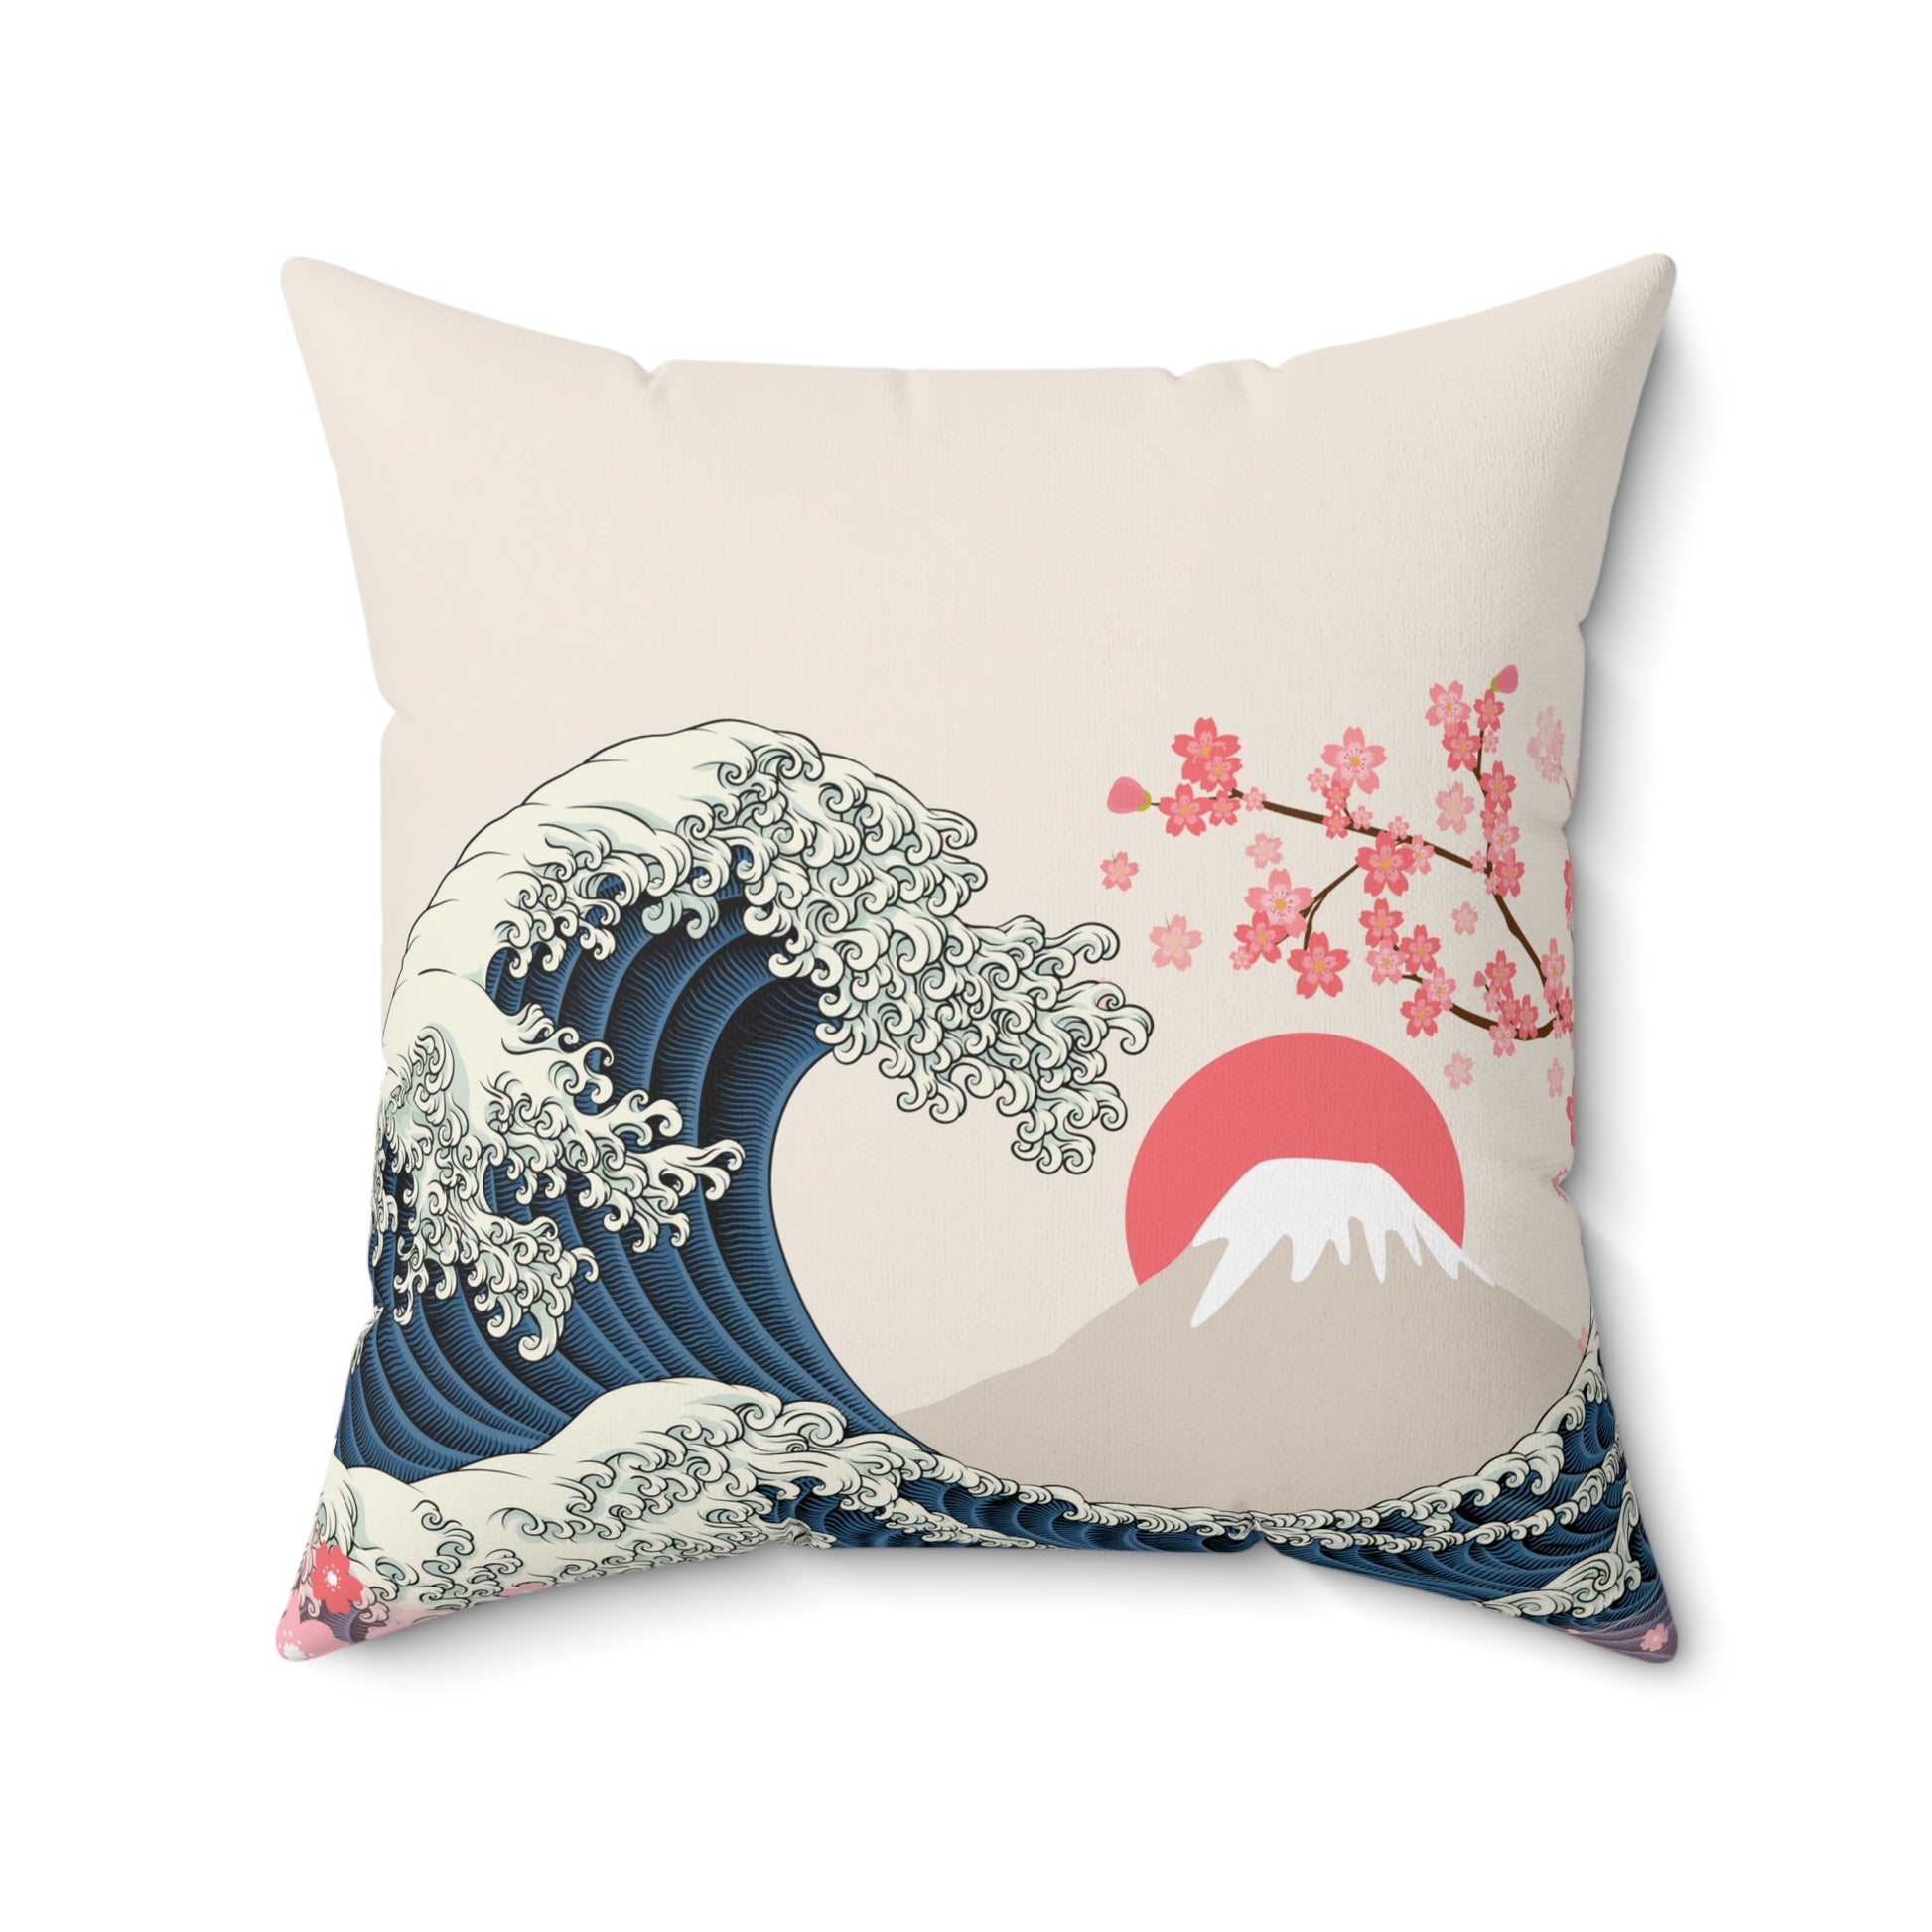 The Great Wave and Sakura Square Pillow